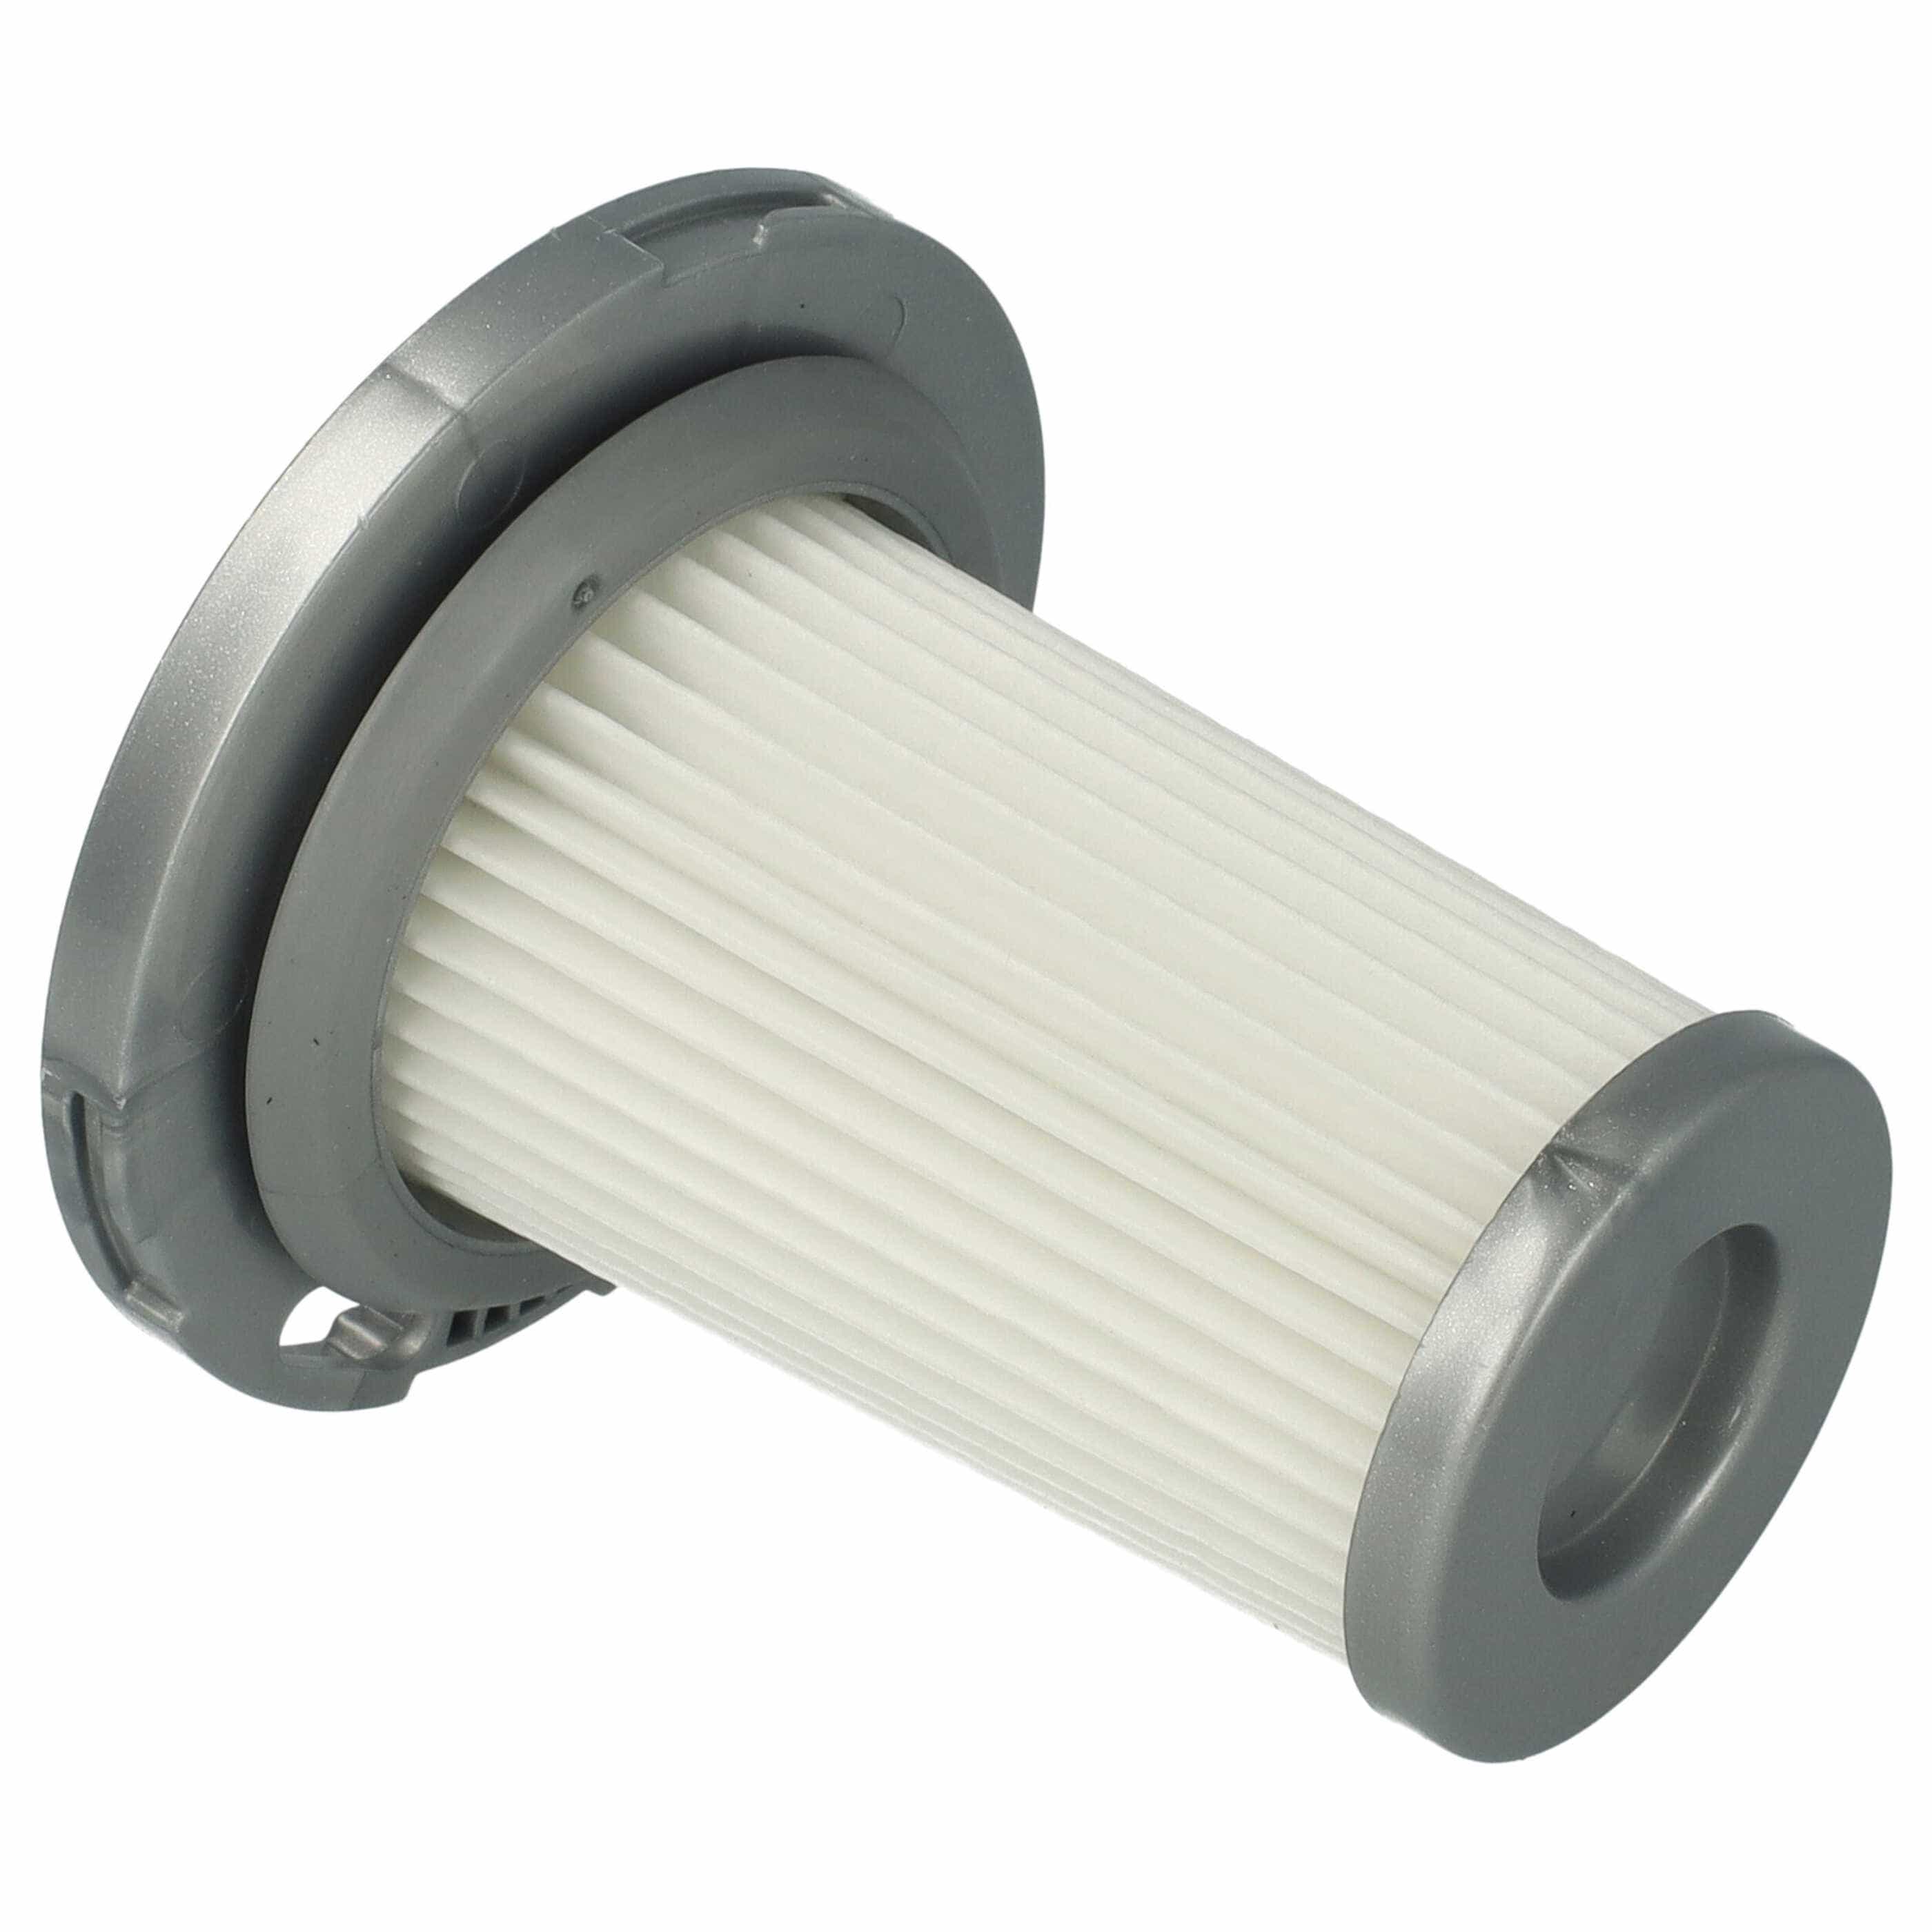 1x cartridge filter replaces Rowenta ZR009005 for TefalVacuum Cleaner